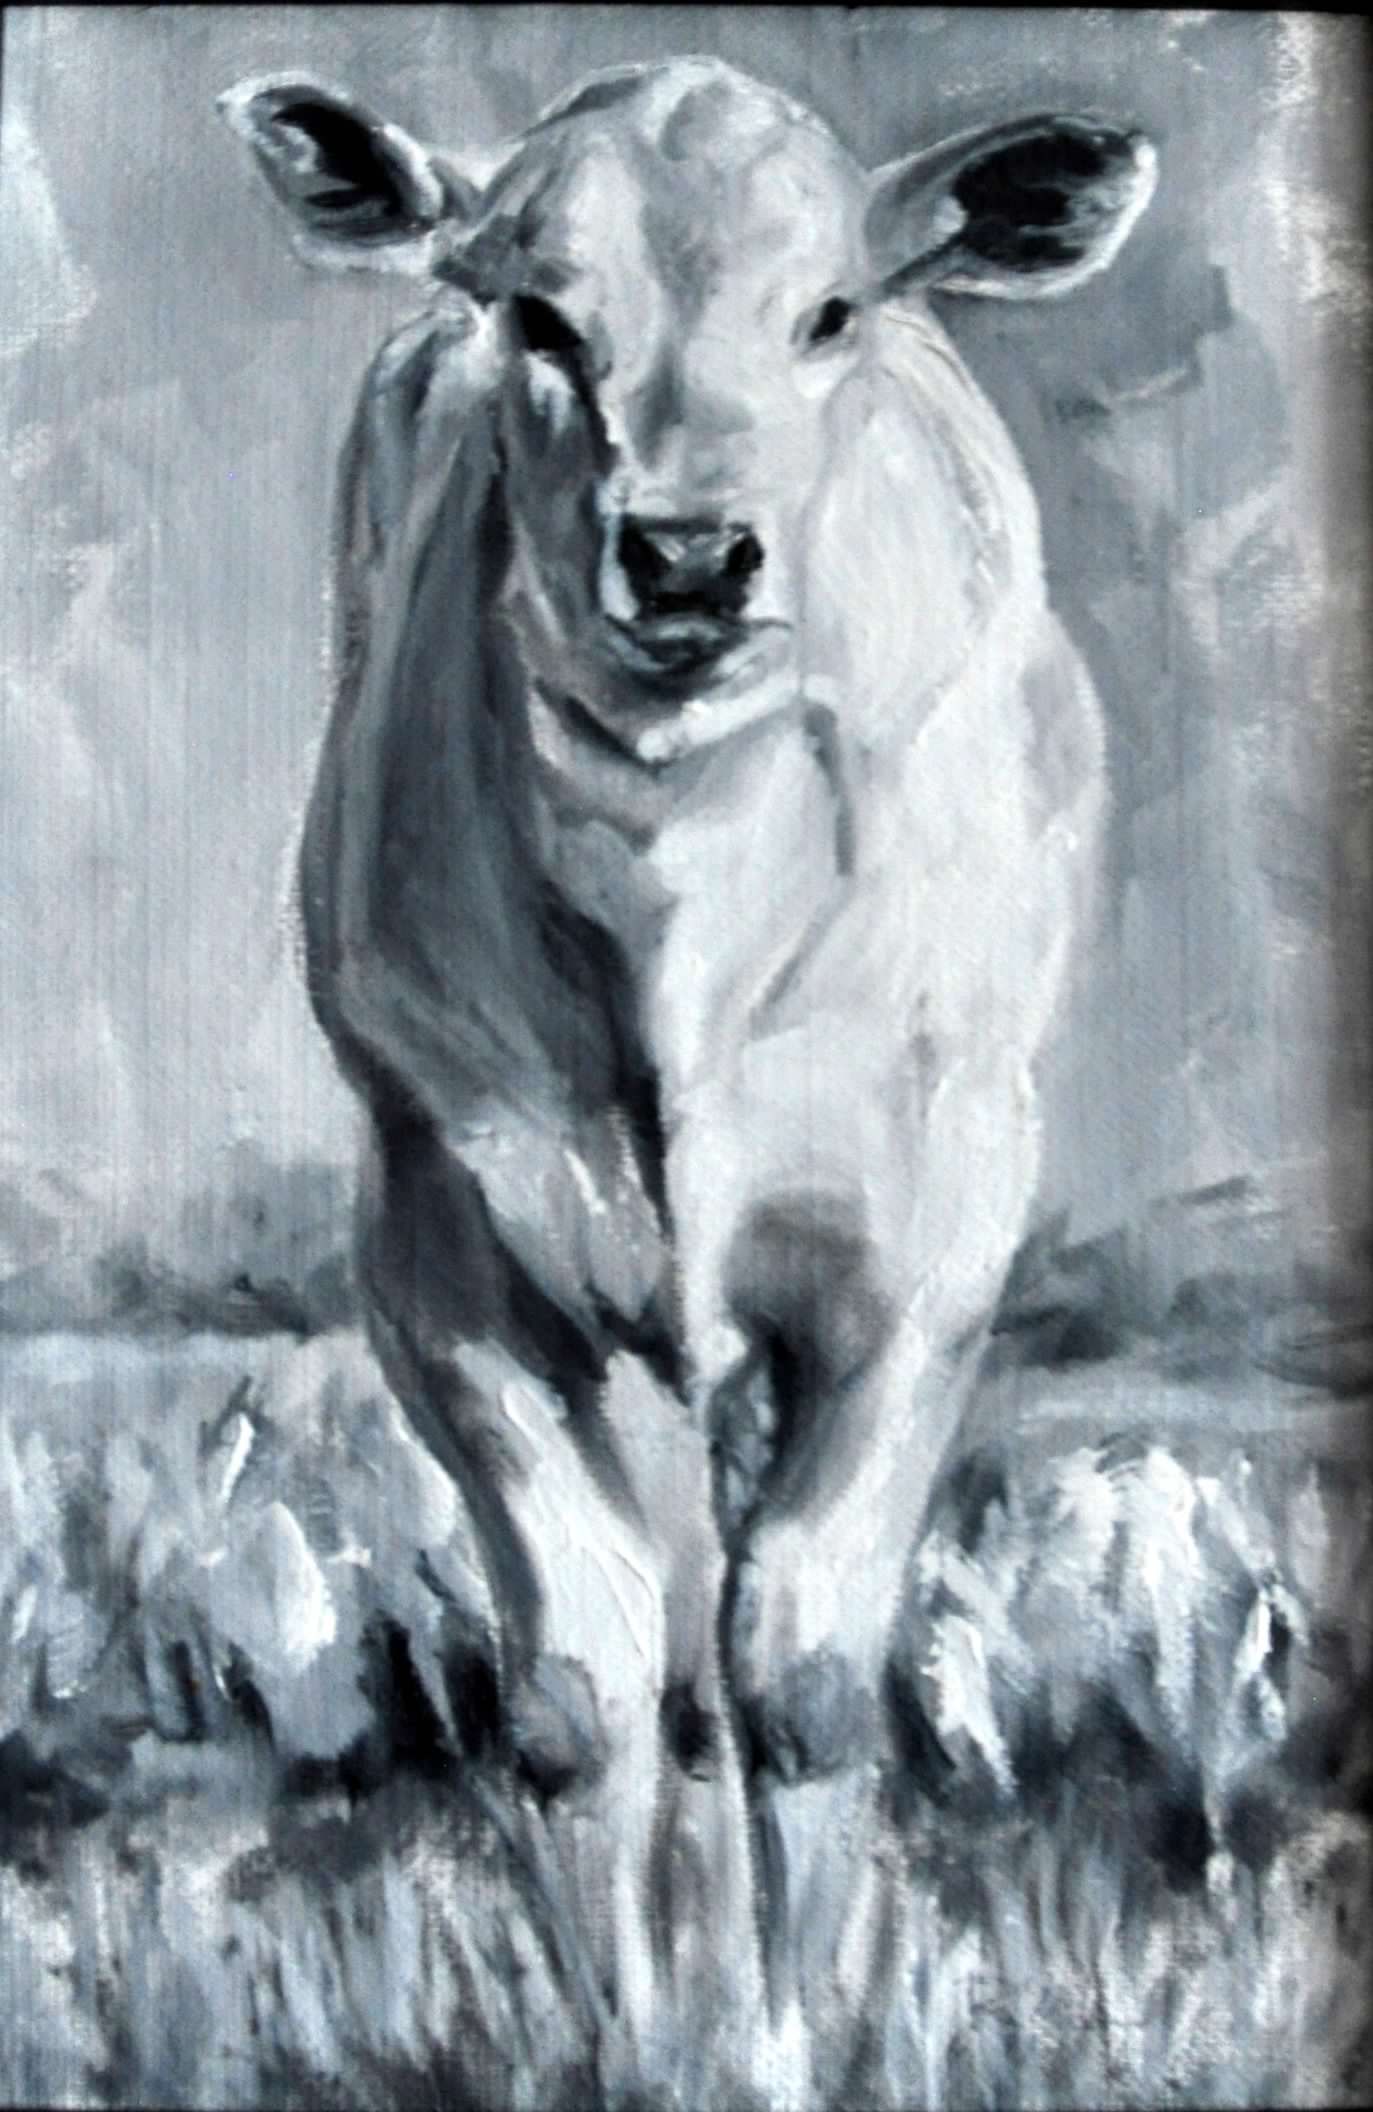 Blank card with envelope  Print of original black & white oil painting of white calf standing in field  5" long x 7" high  Print of an original oil painting by the artist  Artist photograph and information on the back of the card